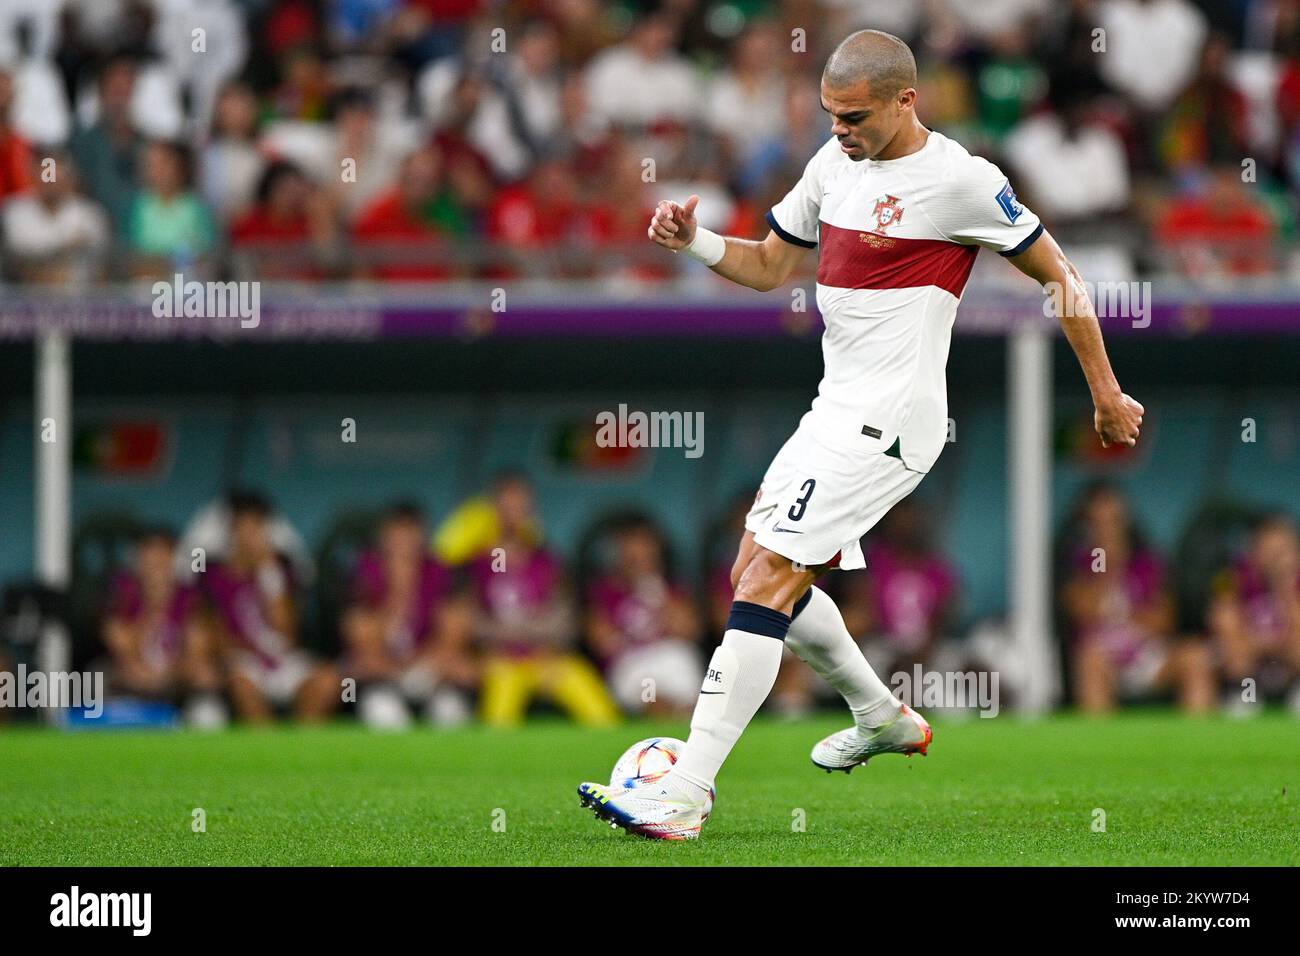 AL RAYYAN, QATAR - DECEMBER 2: Pepe of Portugal in action during the Group H - FIFA World Cup Qatar 2022 match between Korea Republic and Portugal at the Education City Stadium on December 2, 2022 in Al Rayyan, Qatar (Photo by Pablo Morano/BSR Agency) Stock Photo